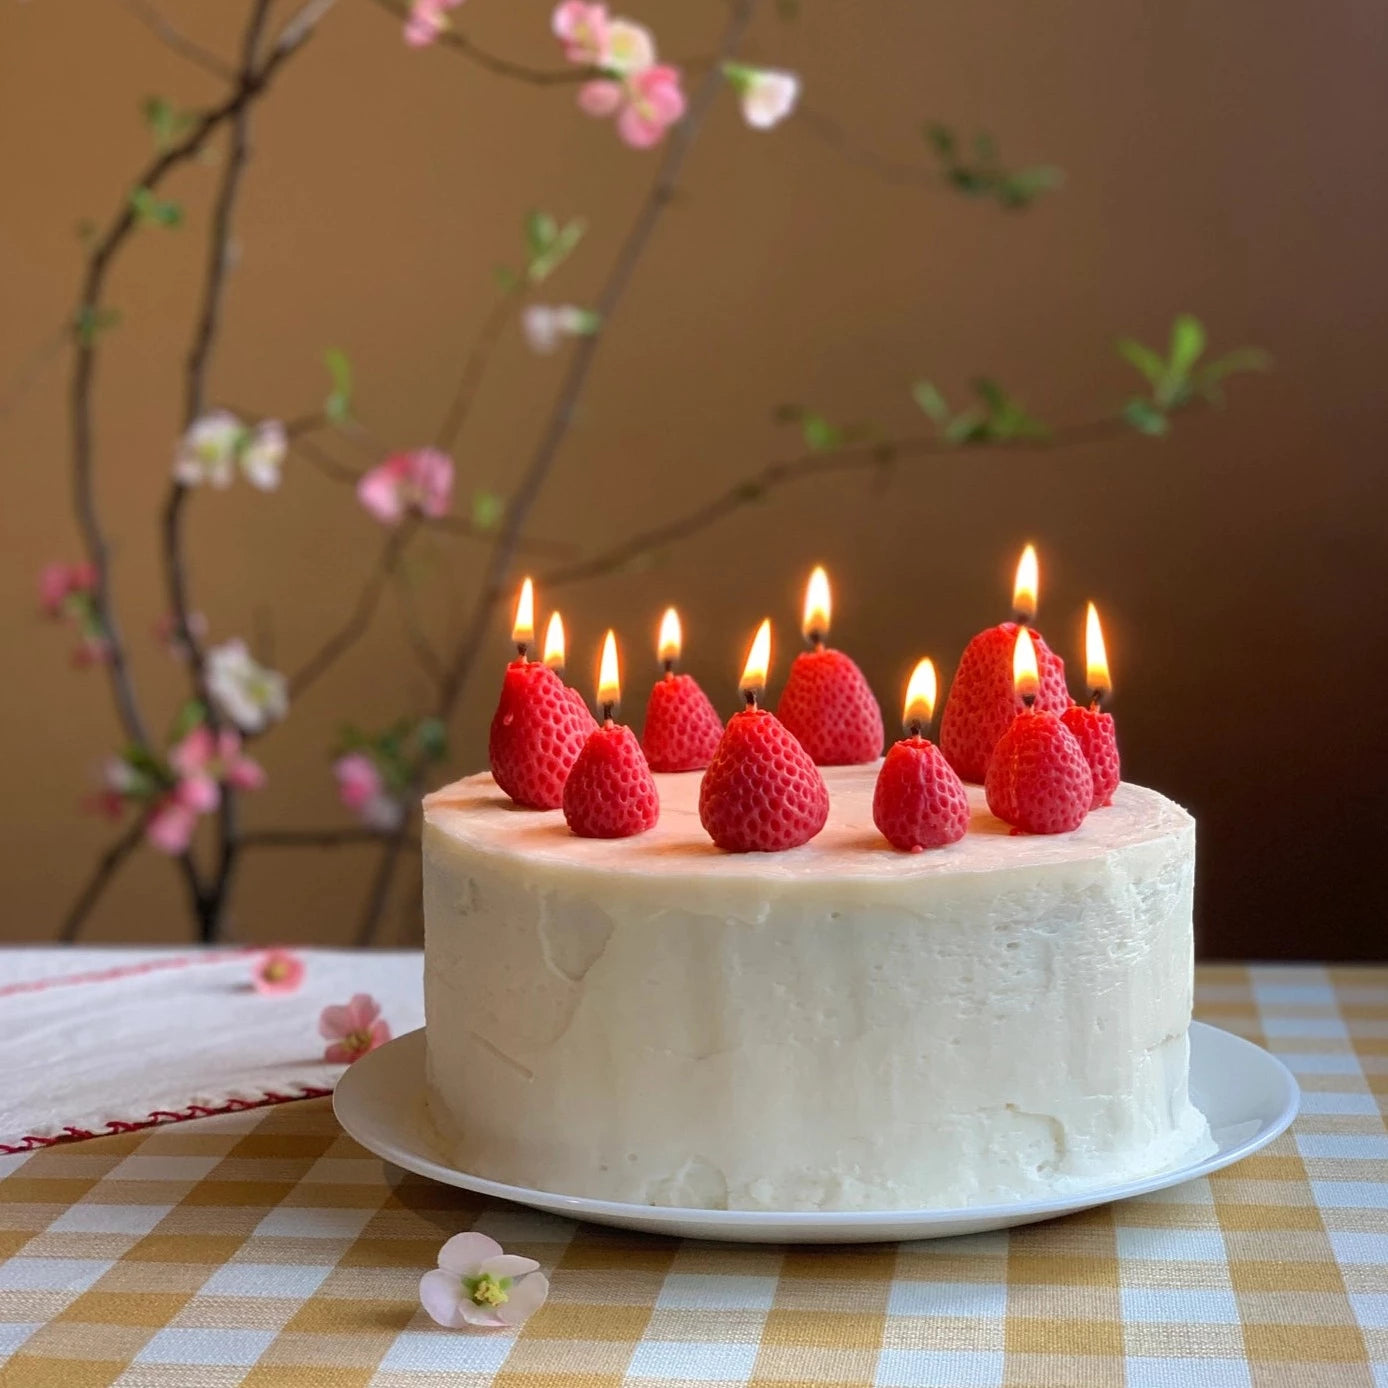 Realistic beeswax strawberry candles lit on a cake.